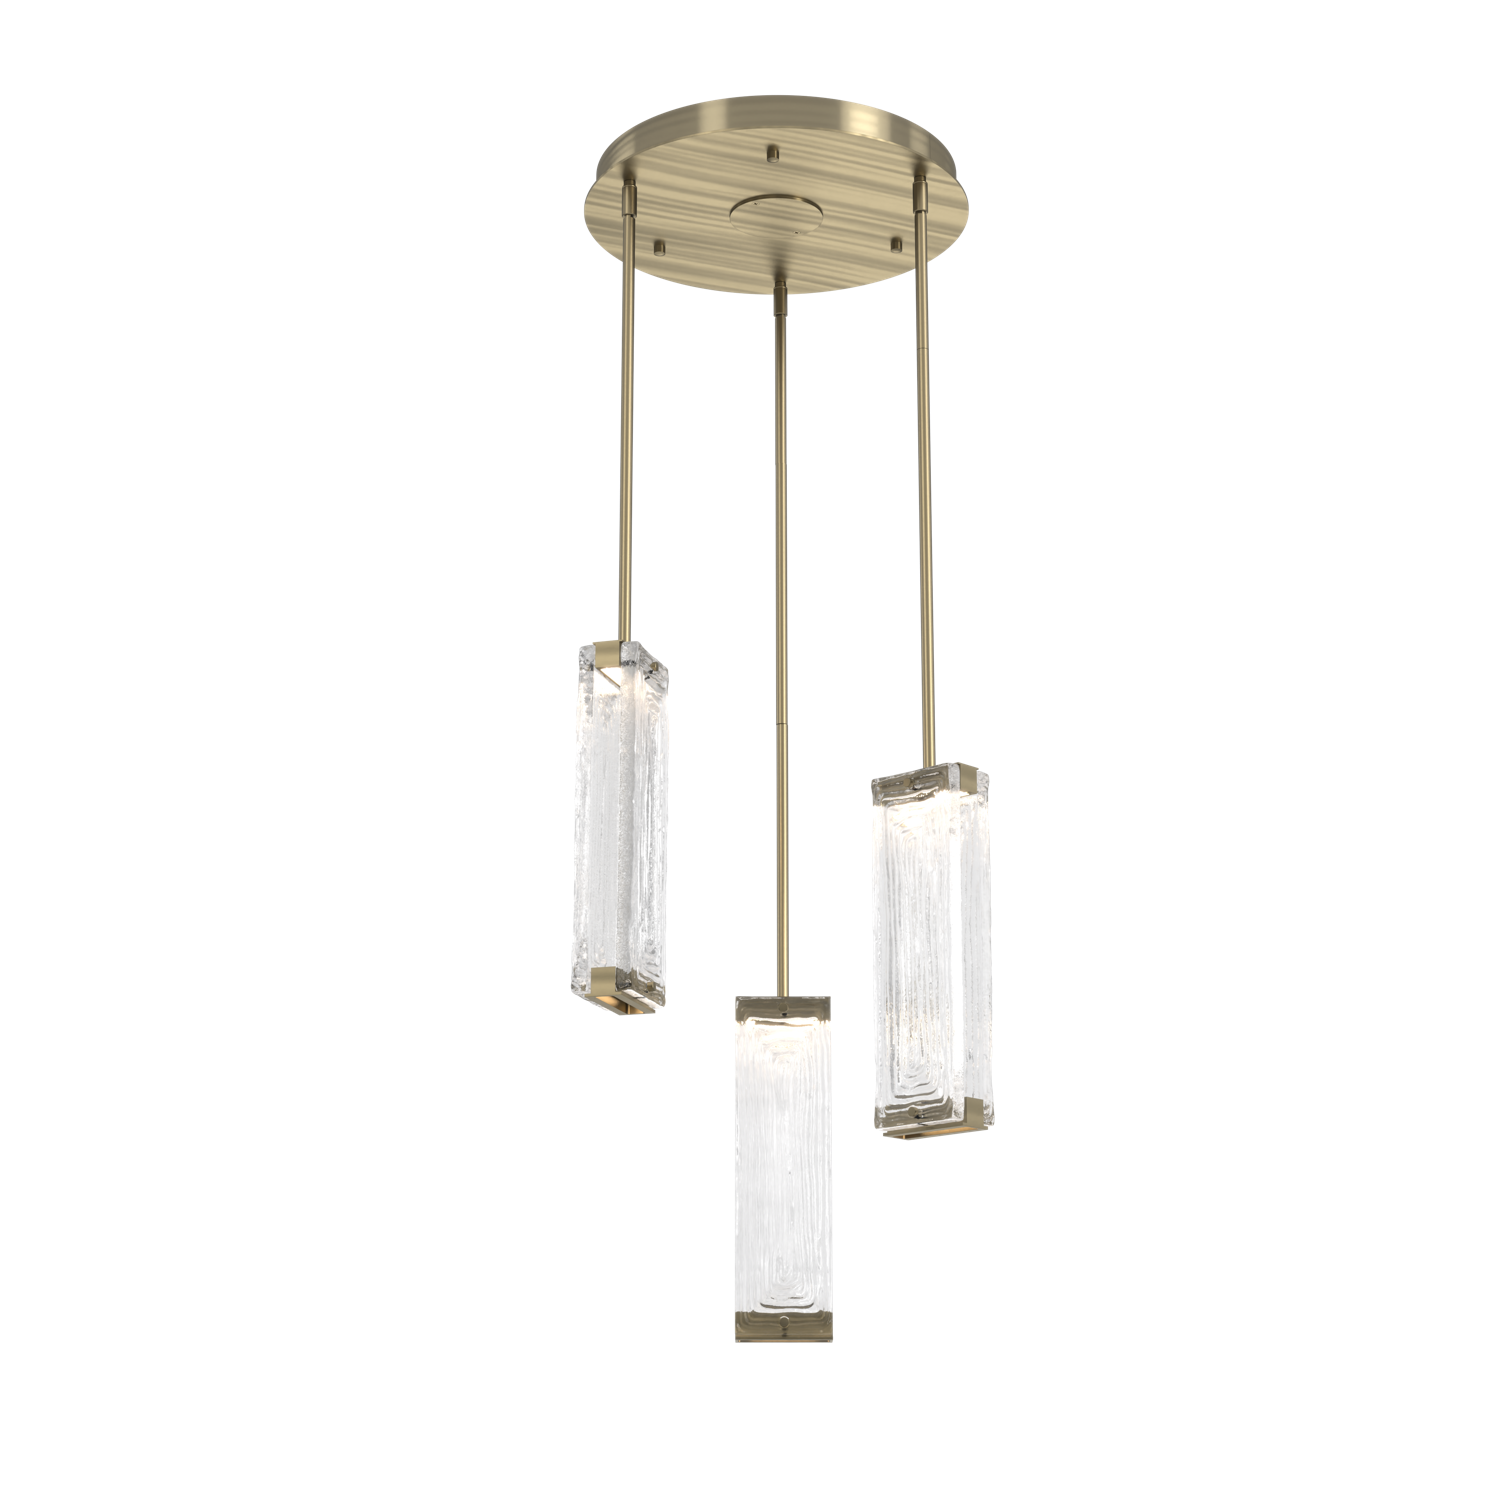 CHB0090-03-HB-TL-Hammerton-Studio-Tabulo-3-light-multi-pendant-chandelier-with-heritage-brass-finish-and-clear-linea-cast-glass-shade-and-LED-lamping